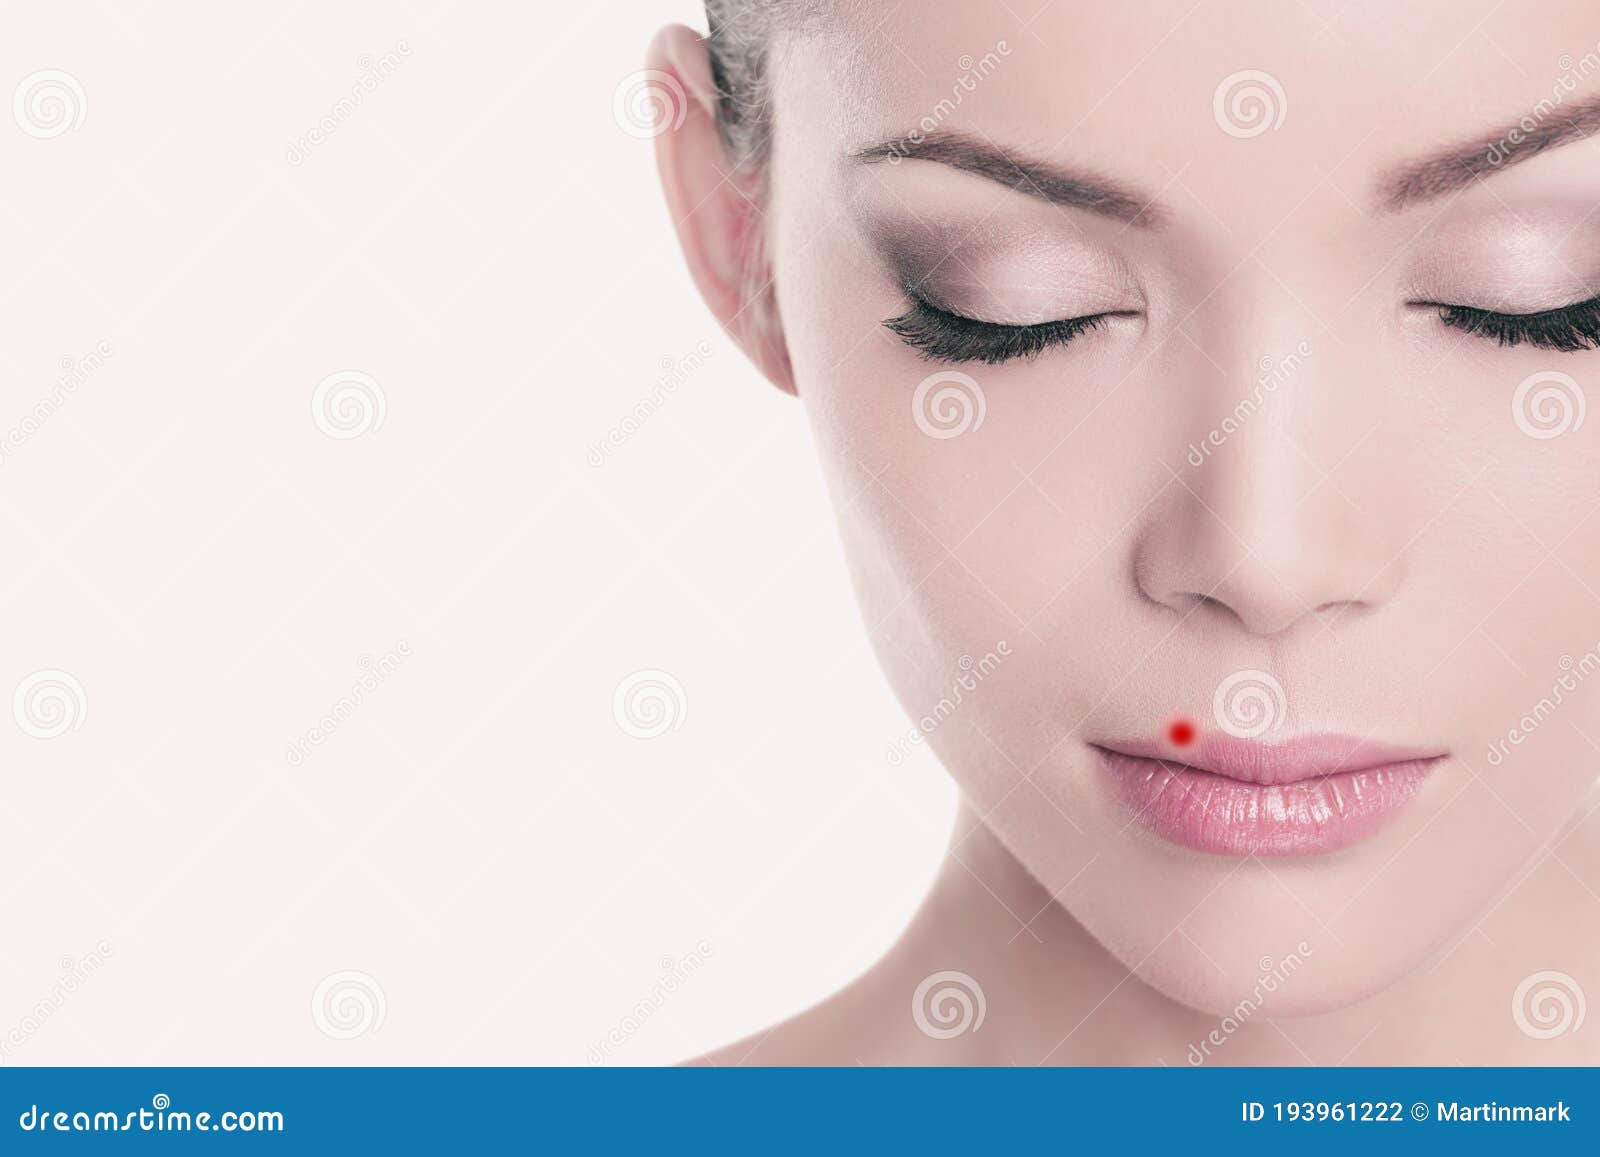 https://thumbs.dreamstime.com/z/herpes-red-circle-area-lips-asian-beauty-woman-model-portrait-girl-cold-sore-design-oral-health-problem-concept-193961222.jpg